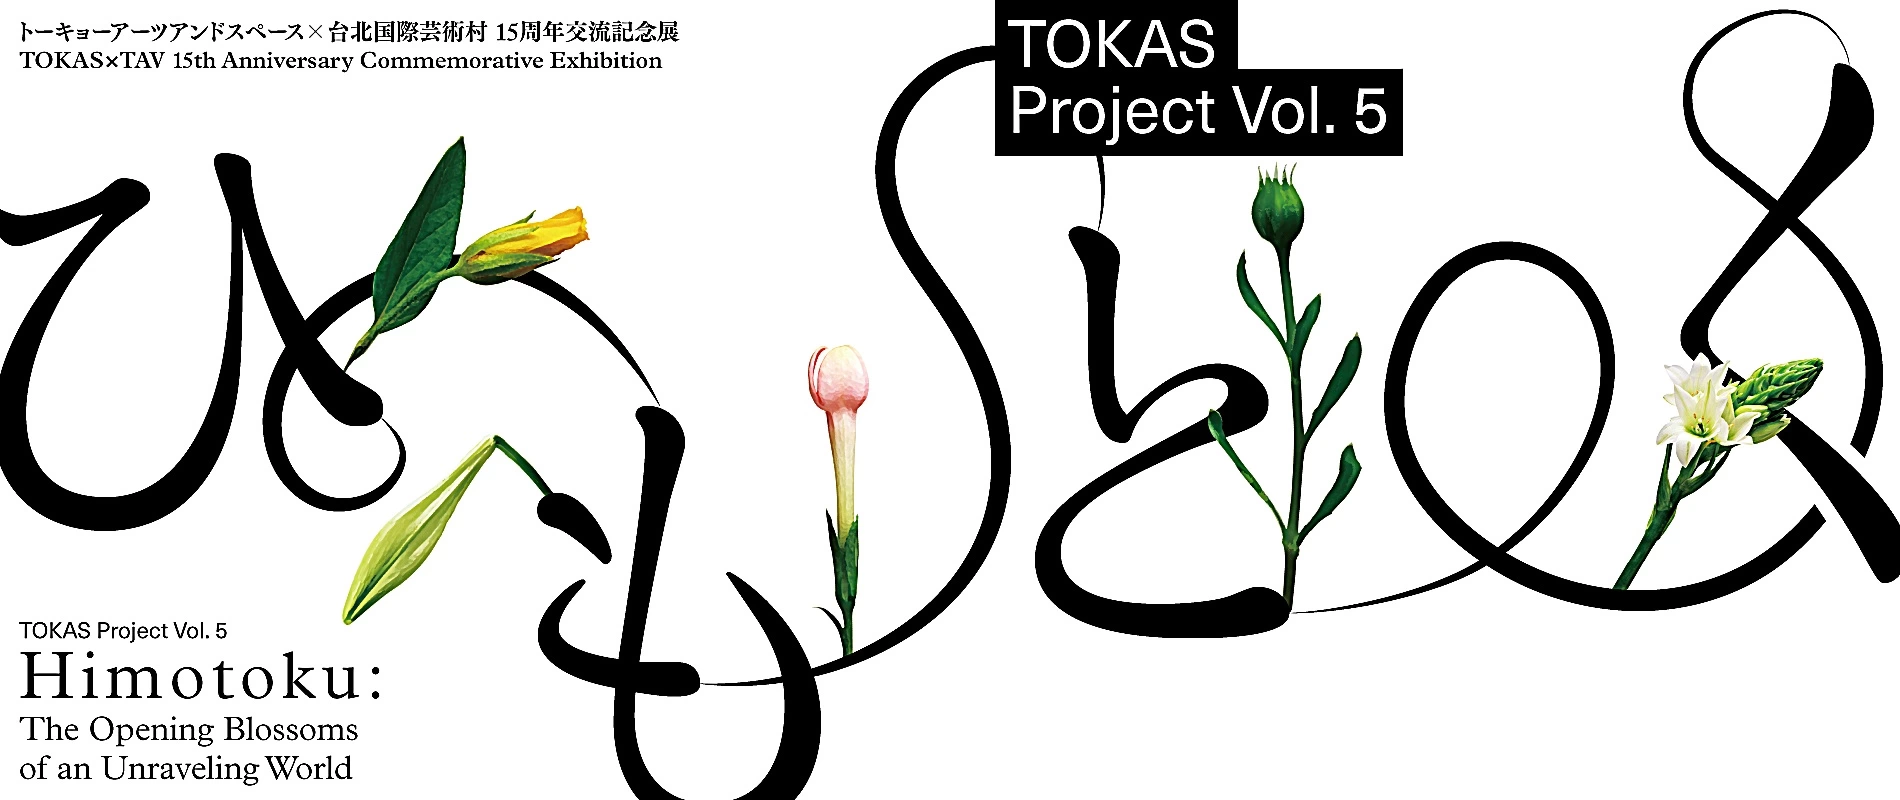 TOKAS Project Vol. 5 ひもとく　Himotoku The Opening Blossoms of an Unraveling World